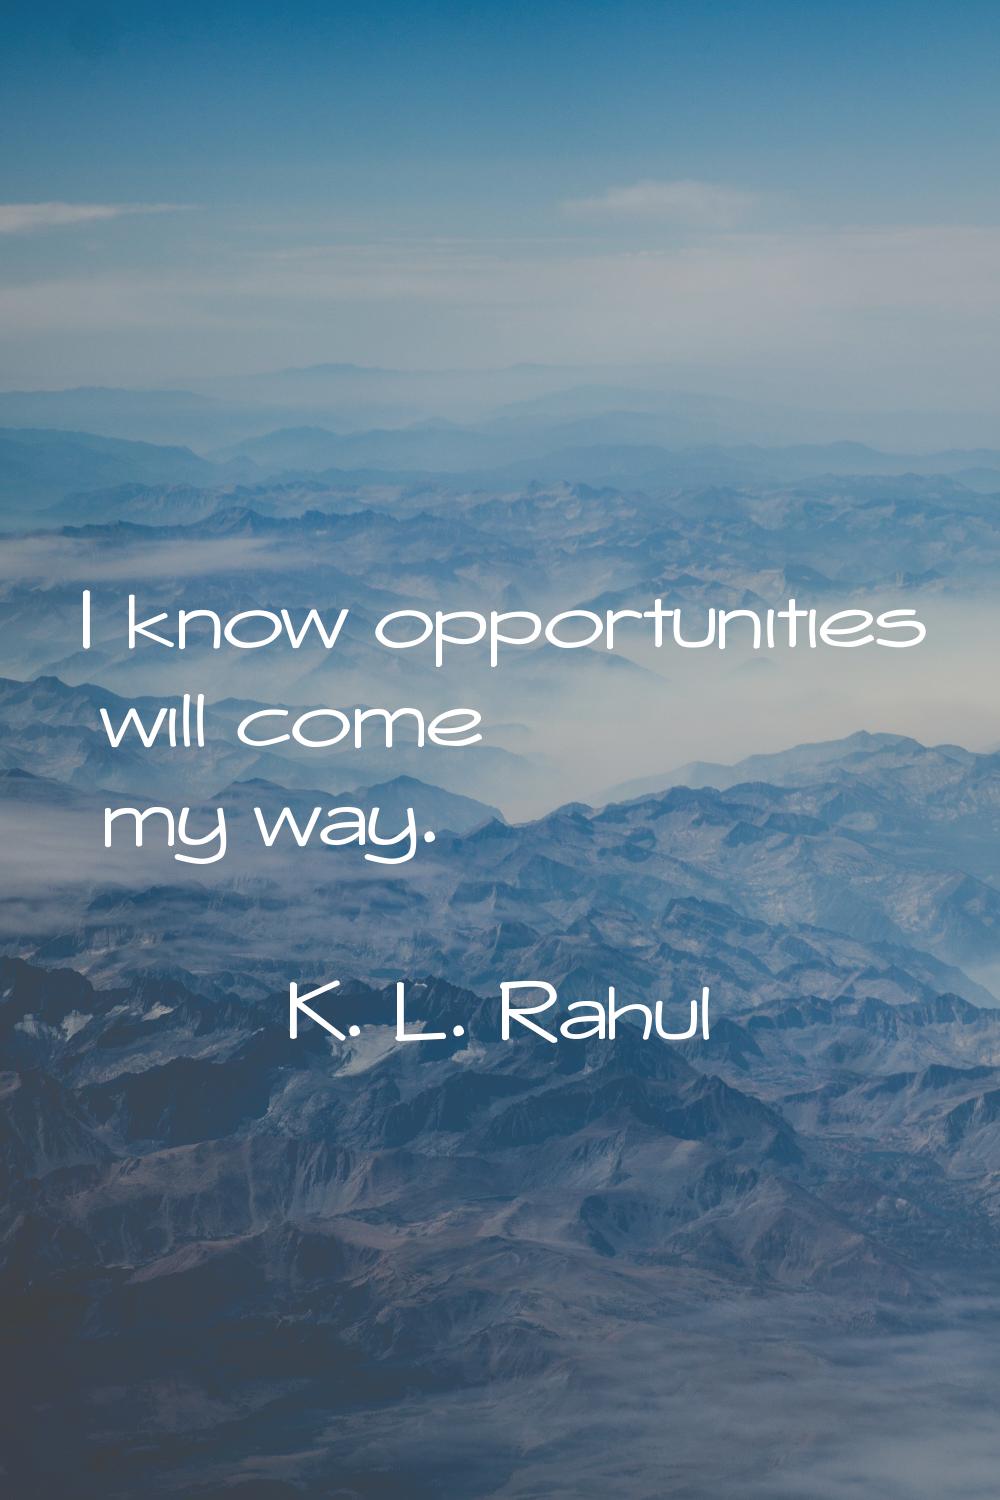 I know opportunities will come my way.